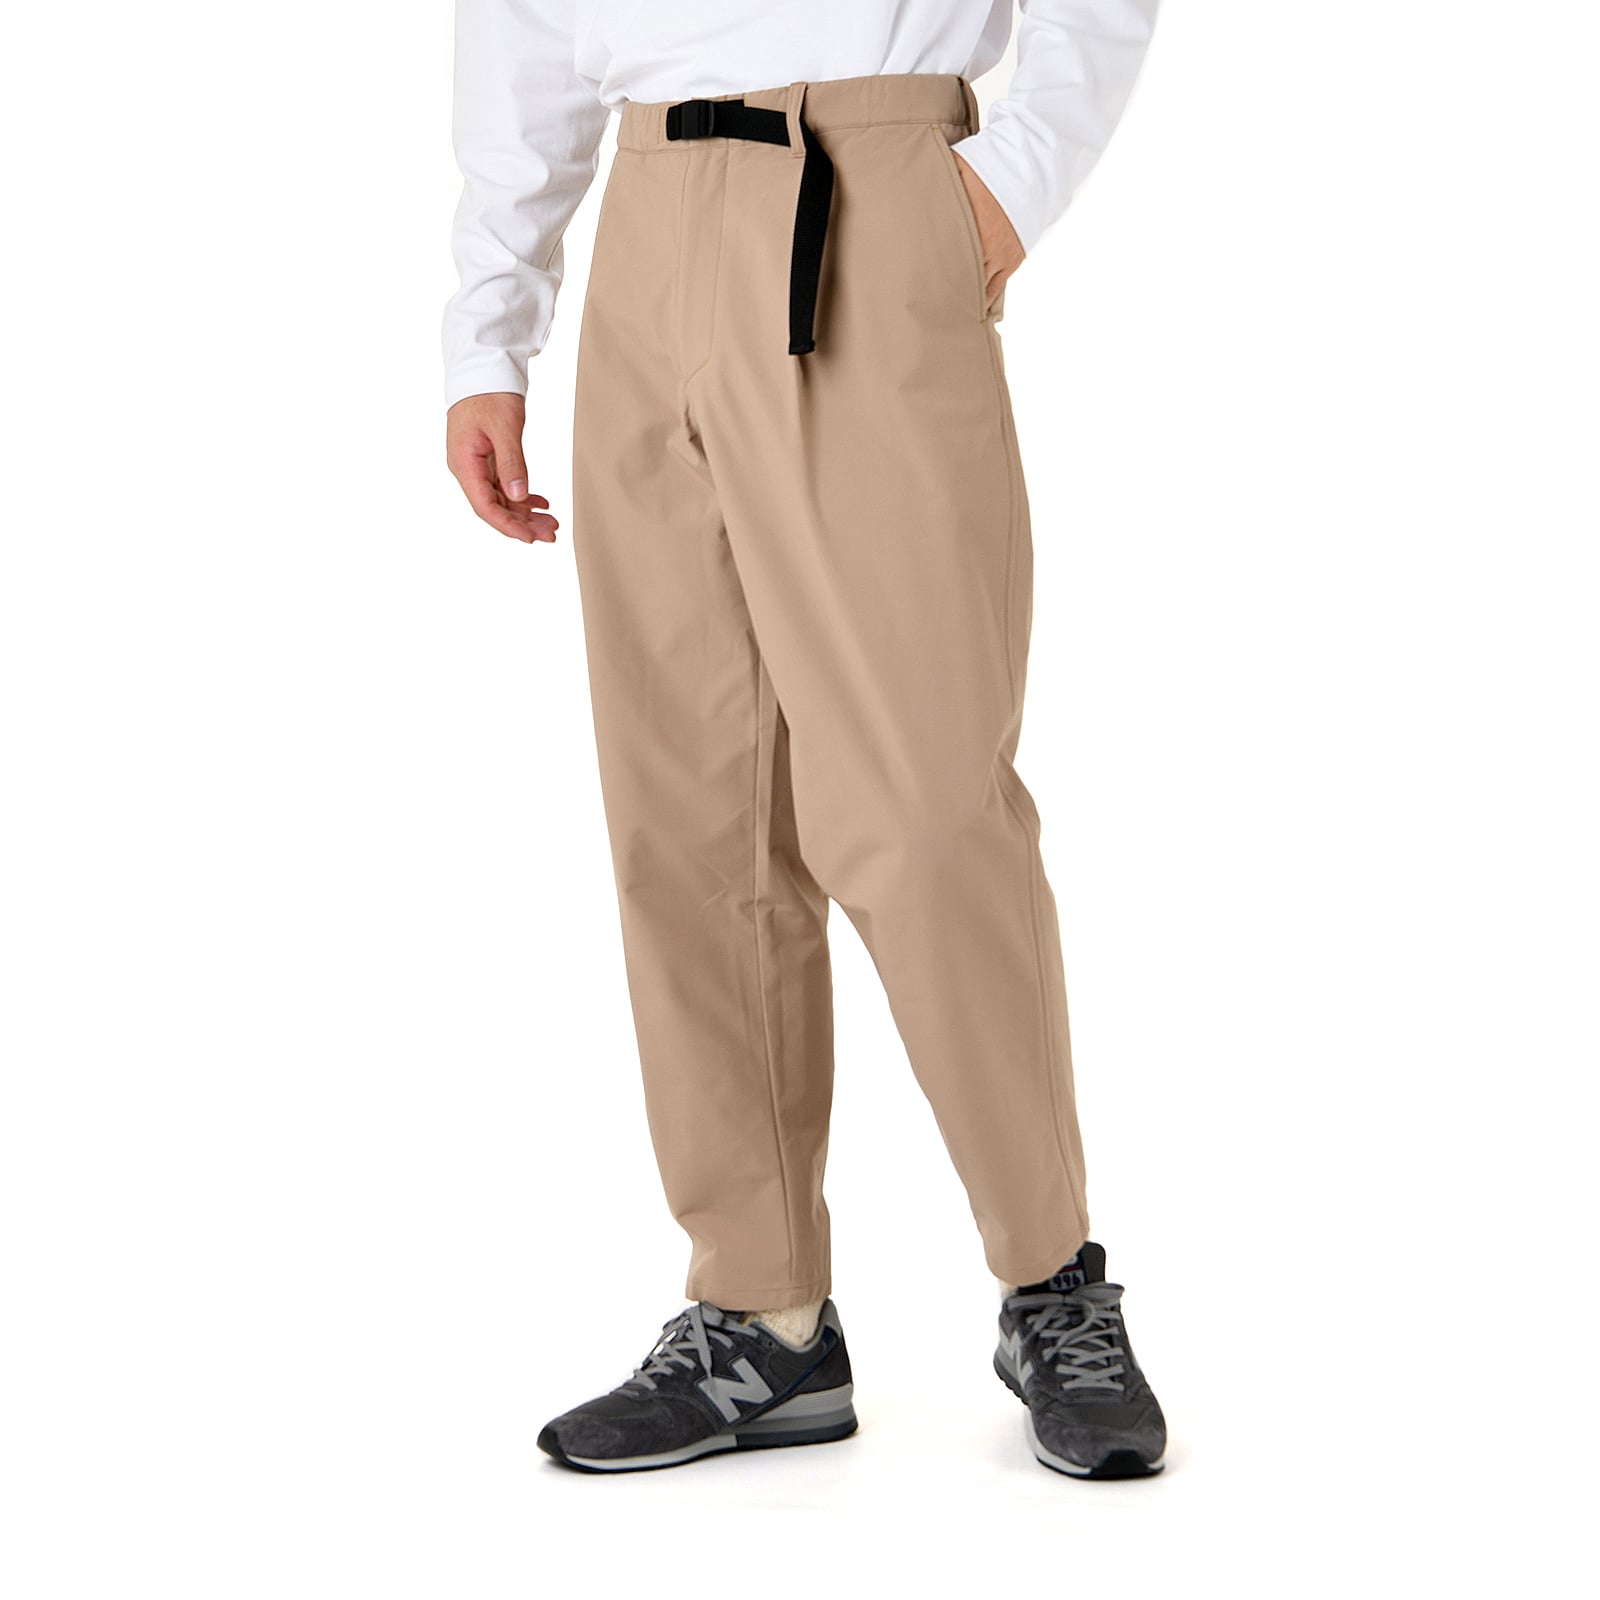 MFO Double Cross Stack Tapered Pants